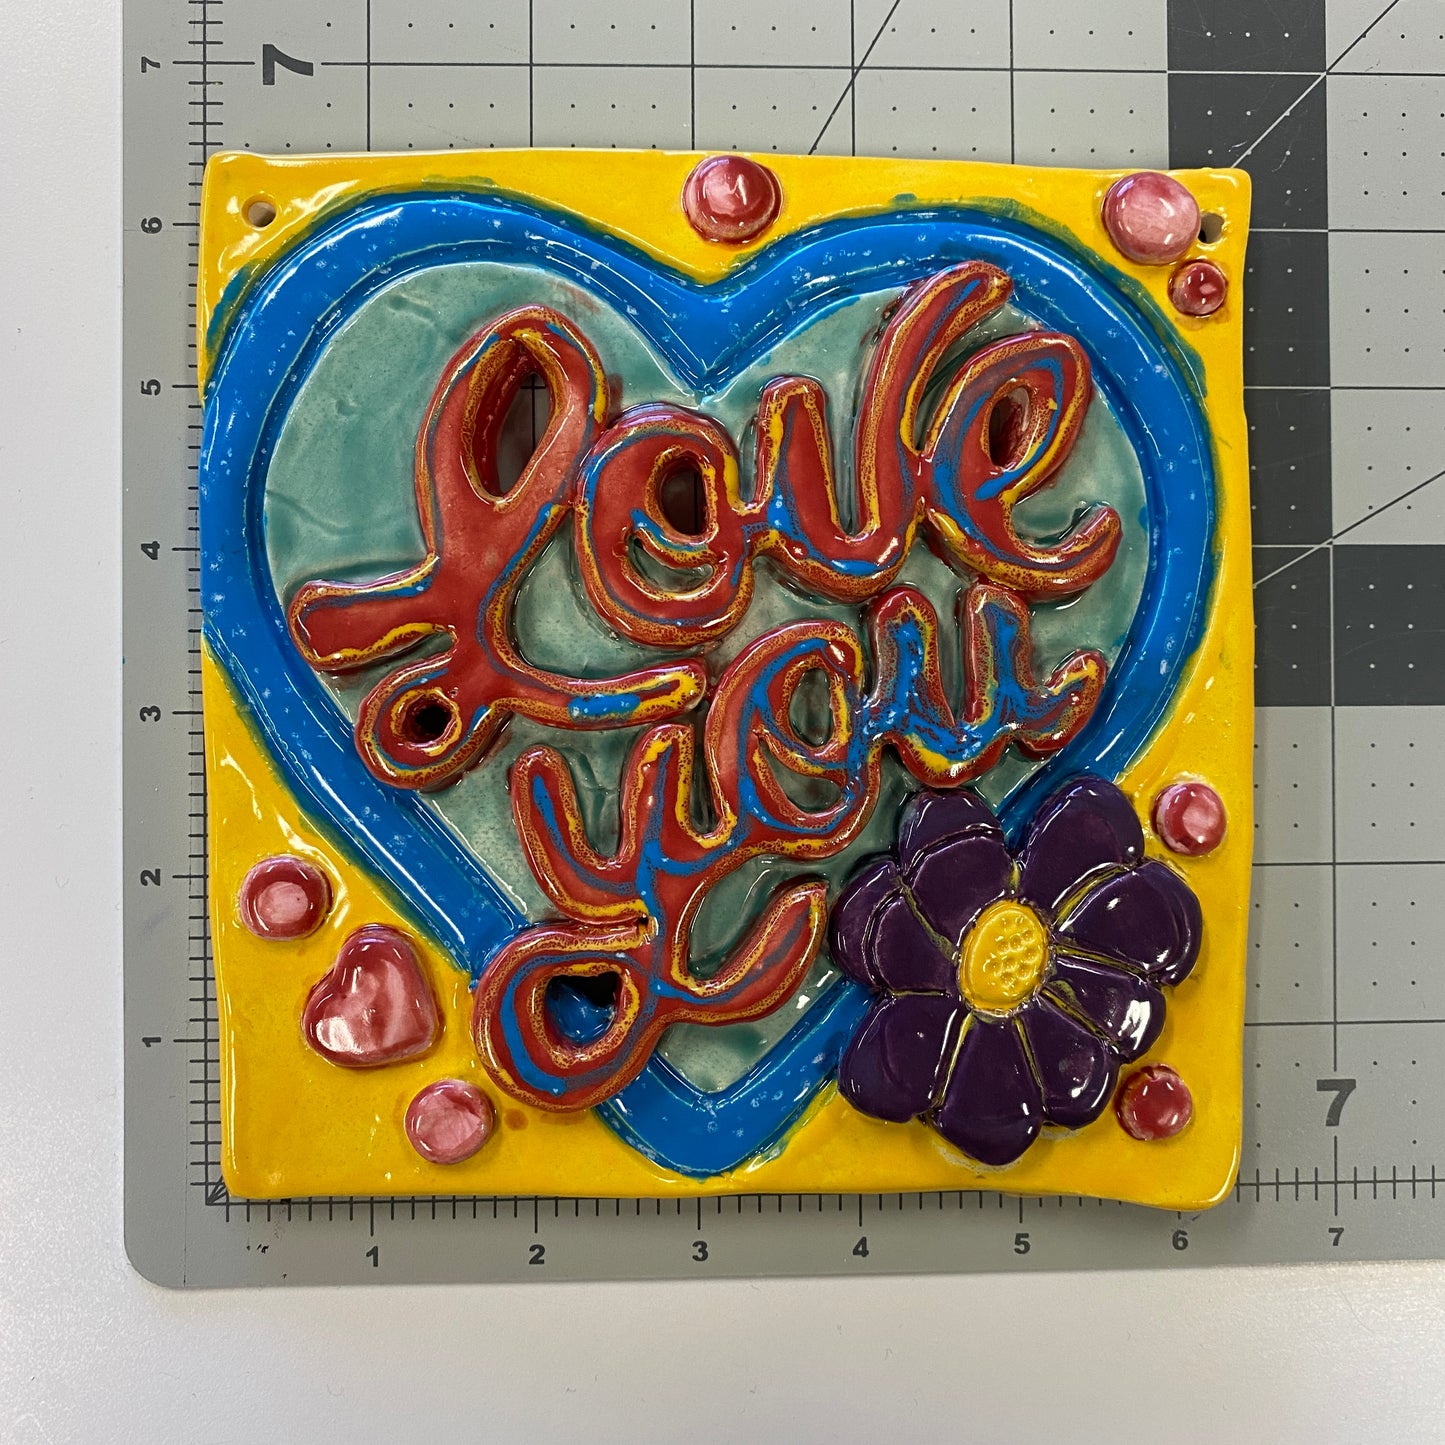 Ceramic Arts Handmade Clay Crafts 6.5-inch x 6.5-inch Glazed "Love You" Tile by Lisa Uptain